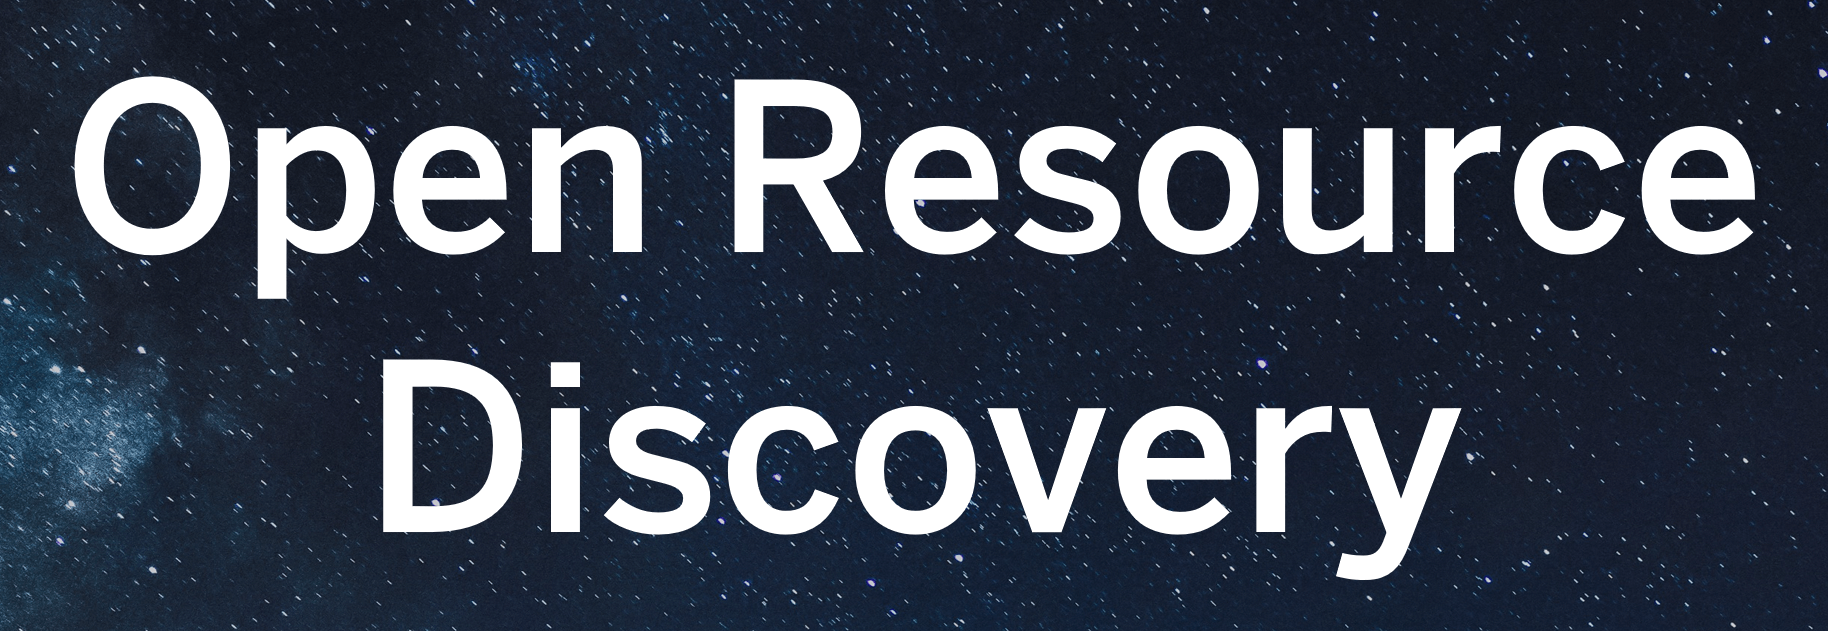 Open Resource Discovery